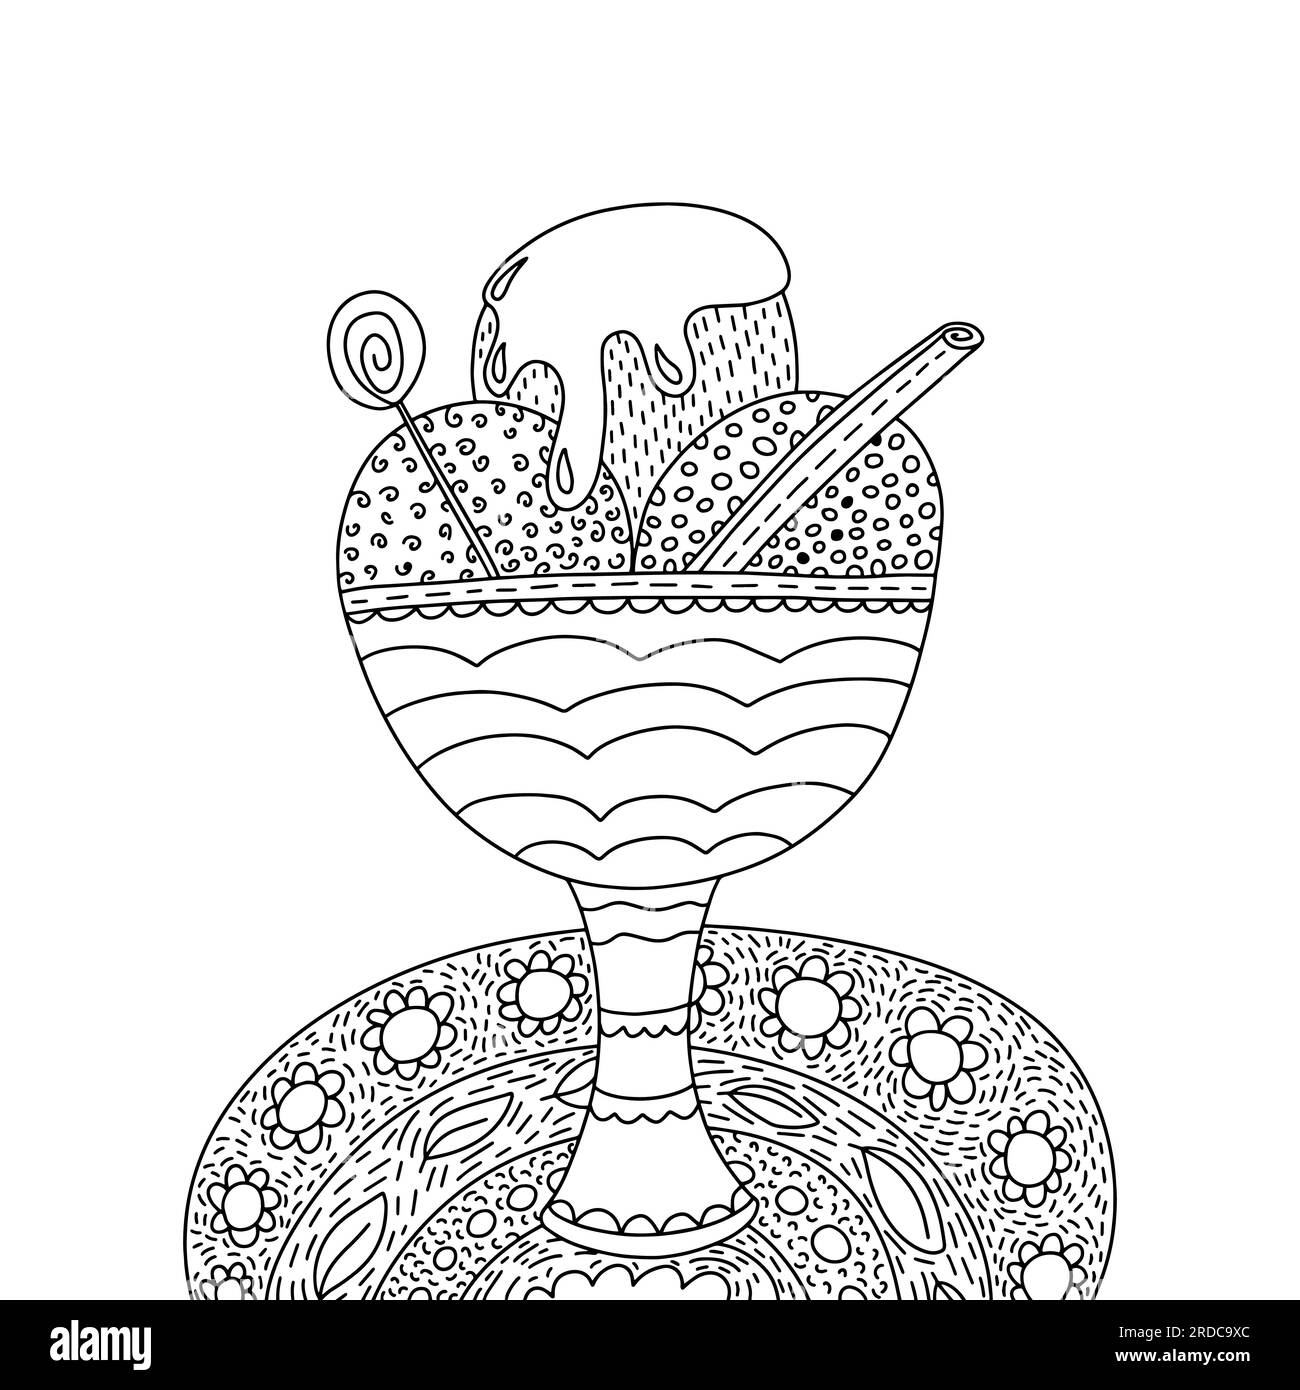 Coloring page with ice cream Stock Vector